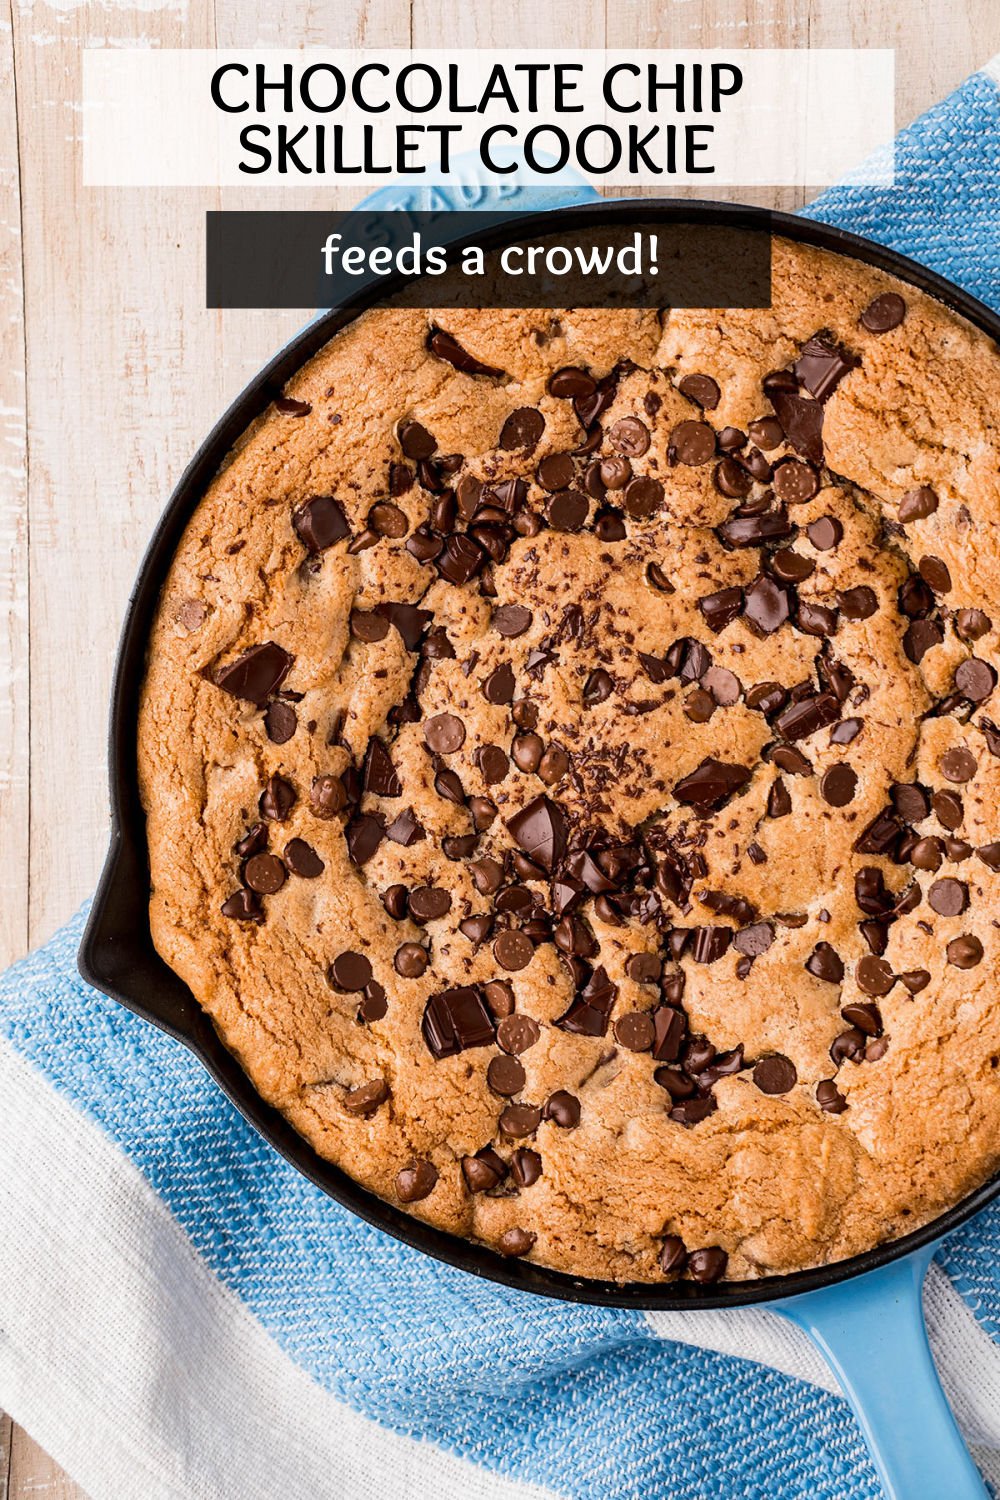 Have you ever made a skillet cookie? A giant chocolate chip cookie baked in a cast-iron skillet. Let it cool to slice and serve a group, or eat it warm with a scoop of ice cream straight out of the skillet!  You can also switch up the mix-ins to suit your taste buds. | www.persnicketyplates.com